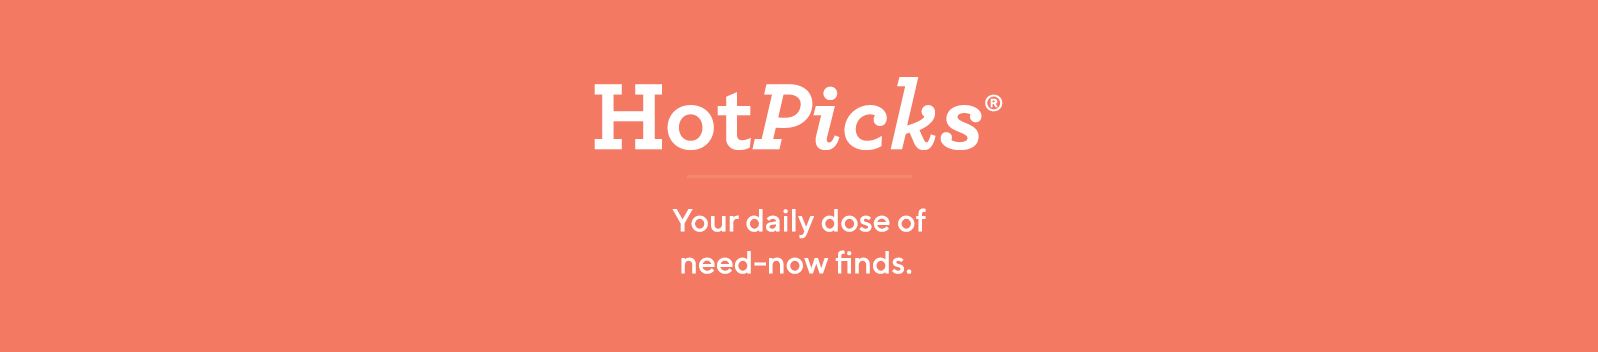 HotPicks®: Your daily dose of need-now finds.